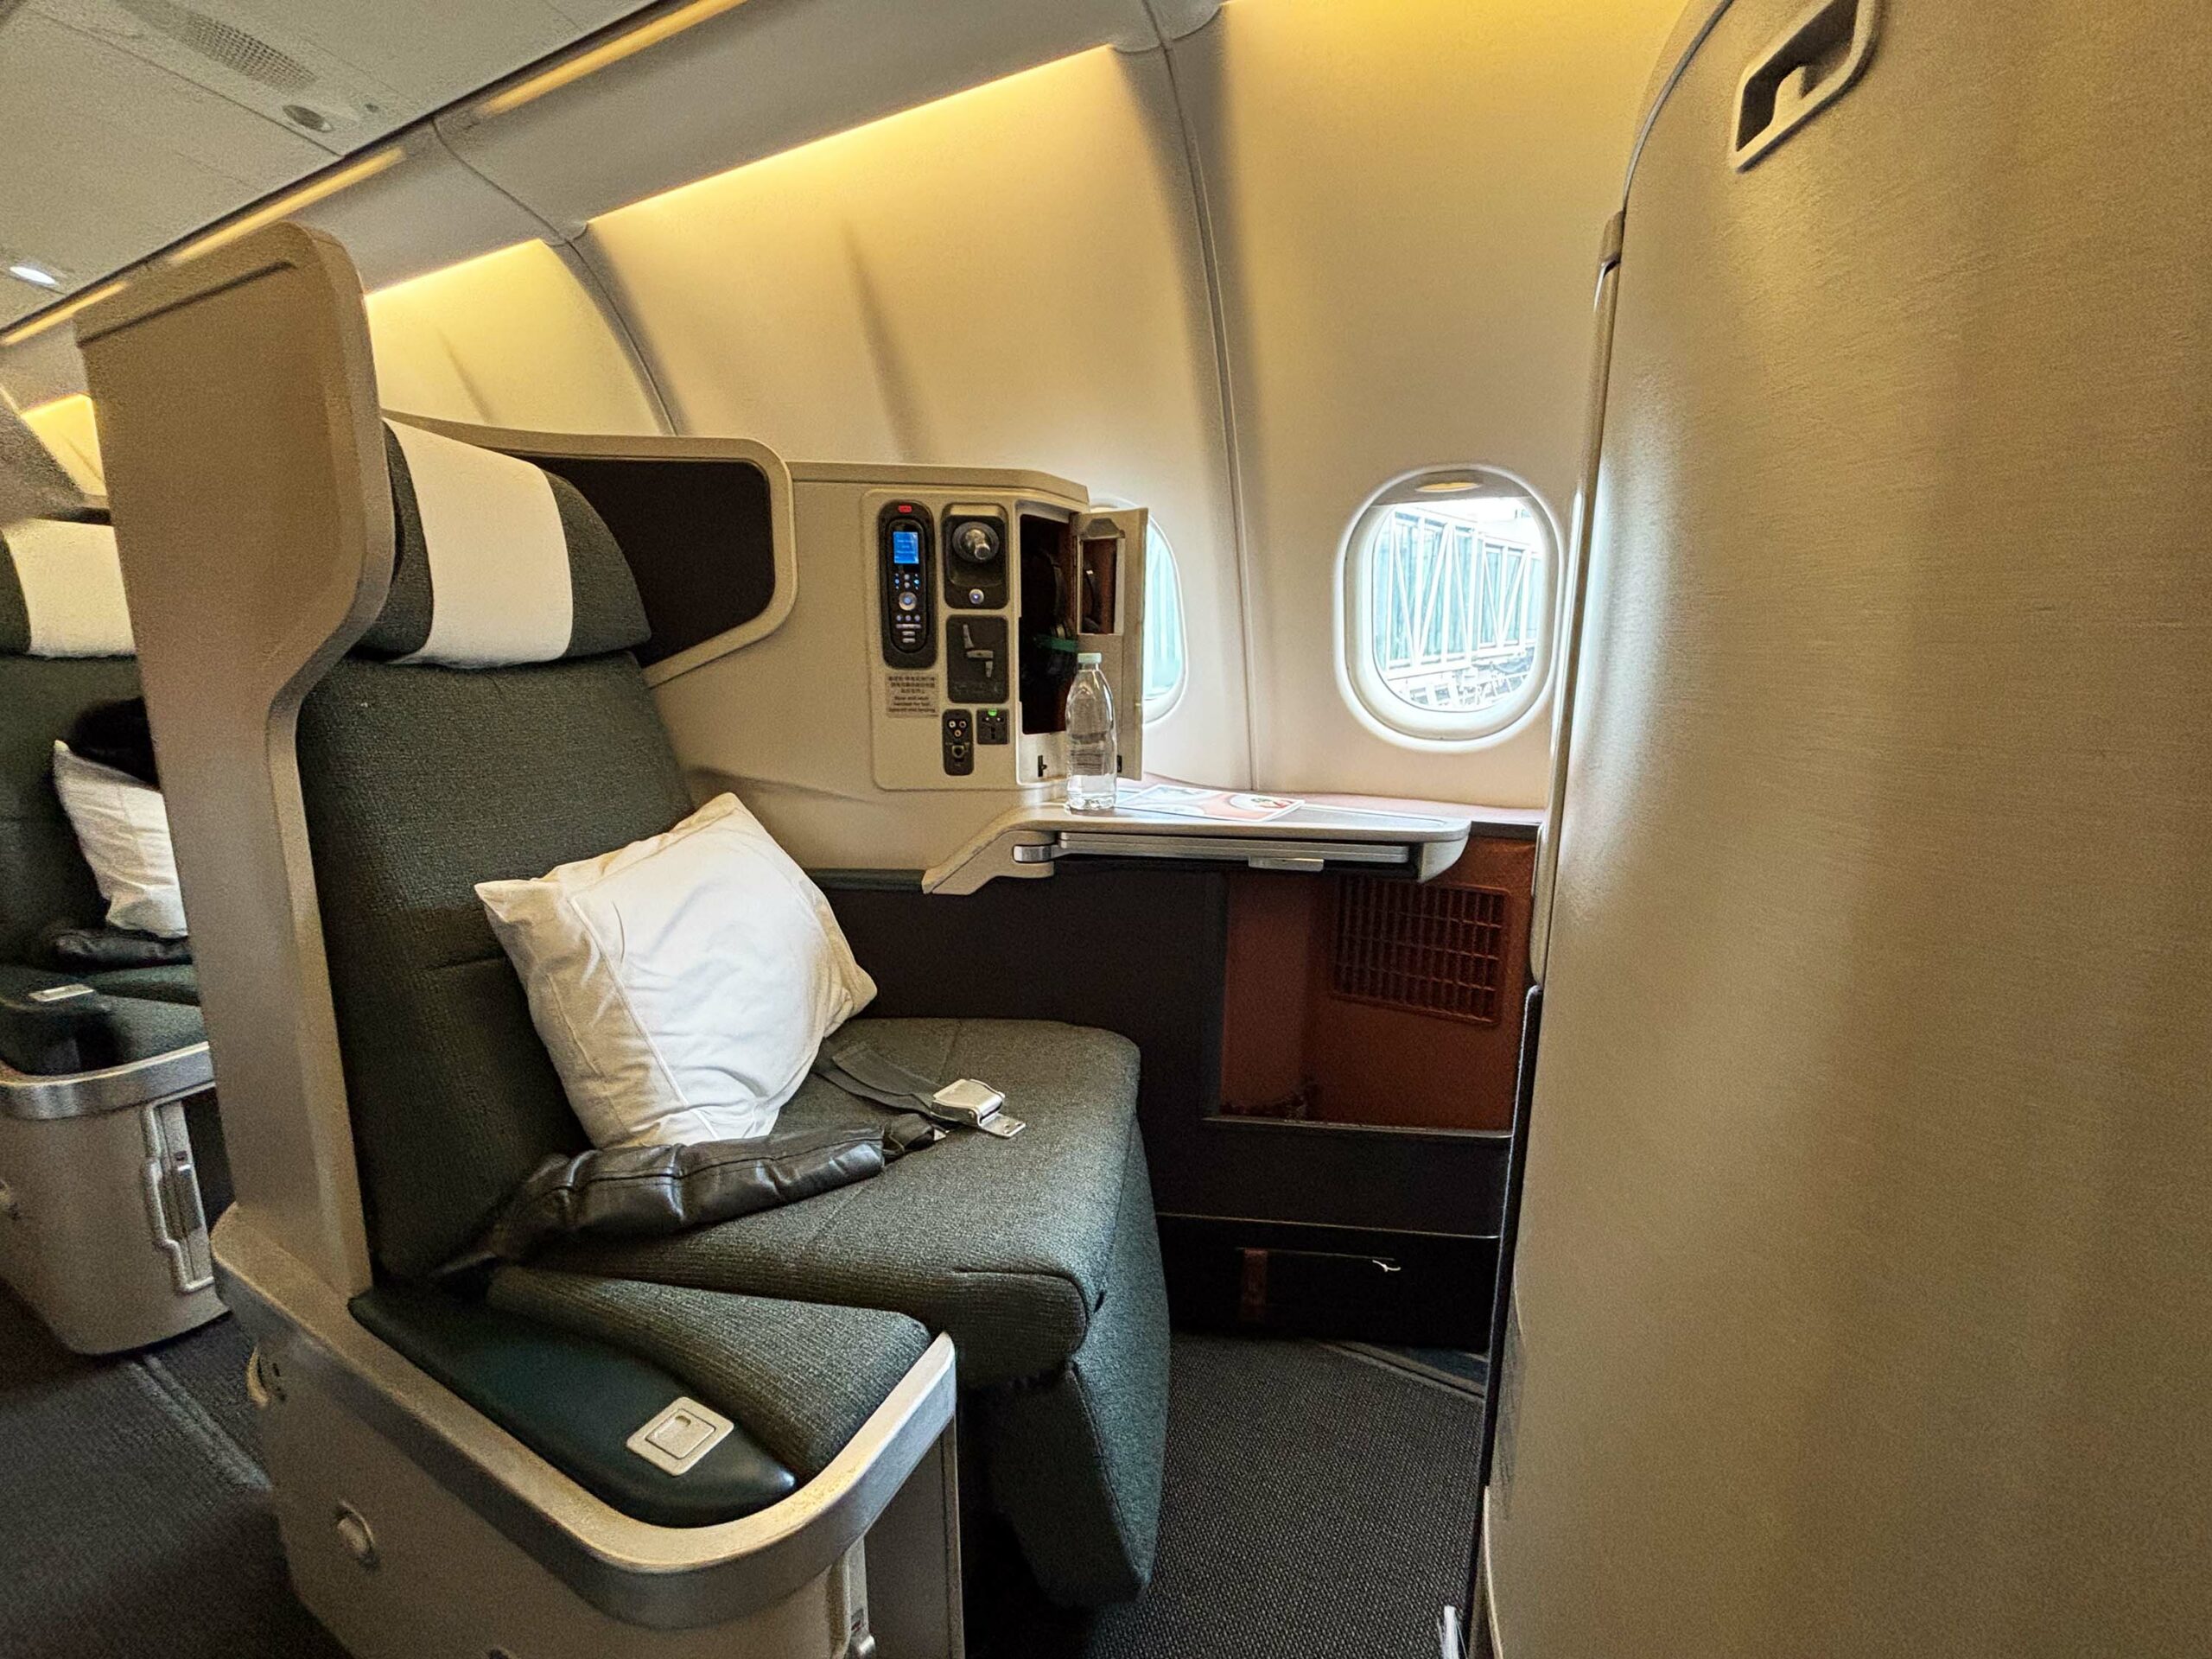 Review: Cathay Pacific A330 Business Class (HKG-CGK)